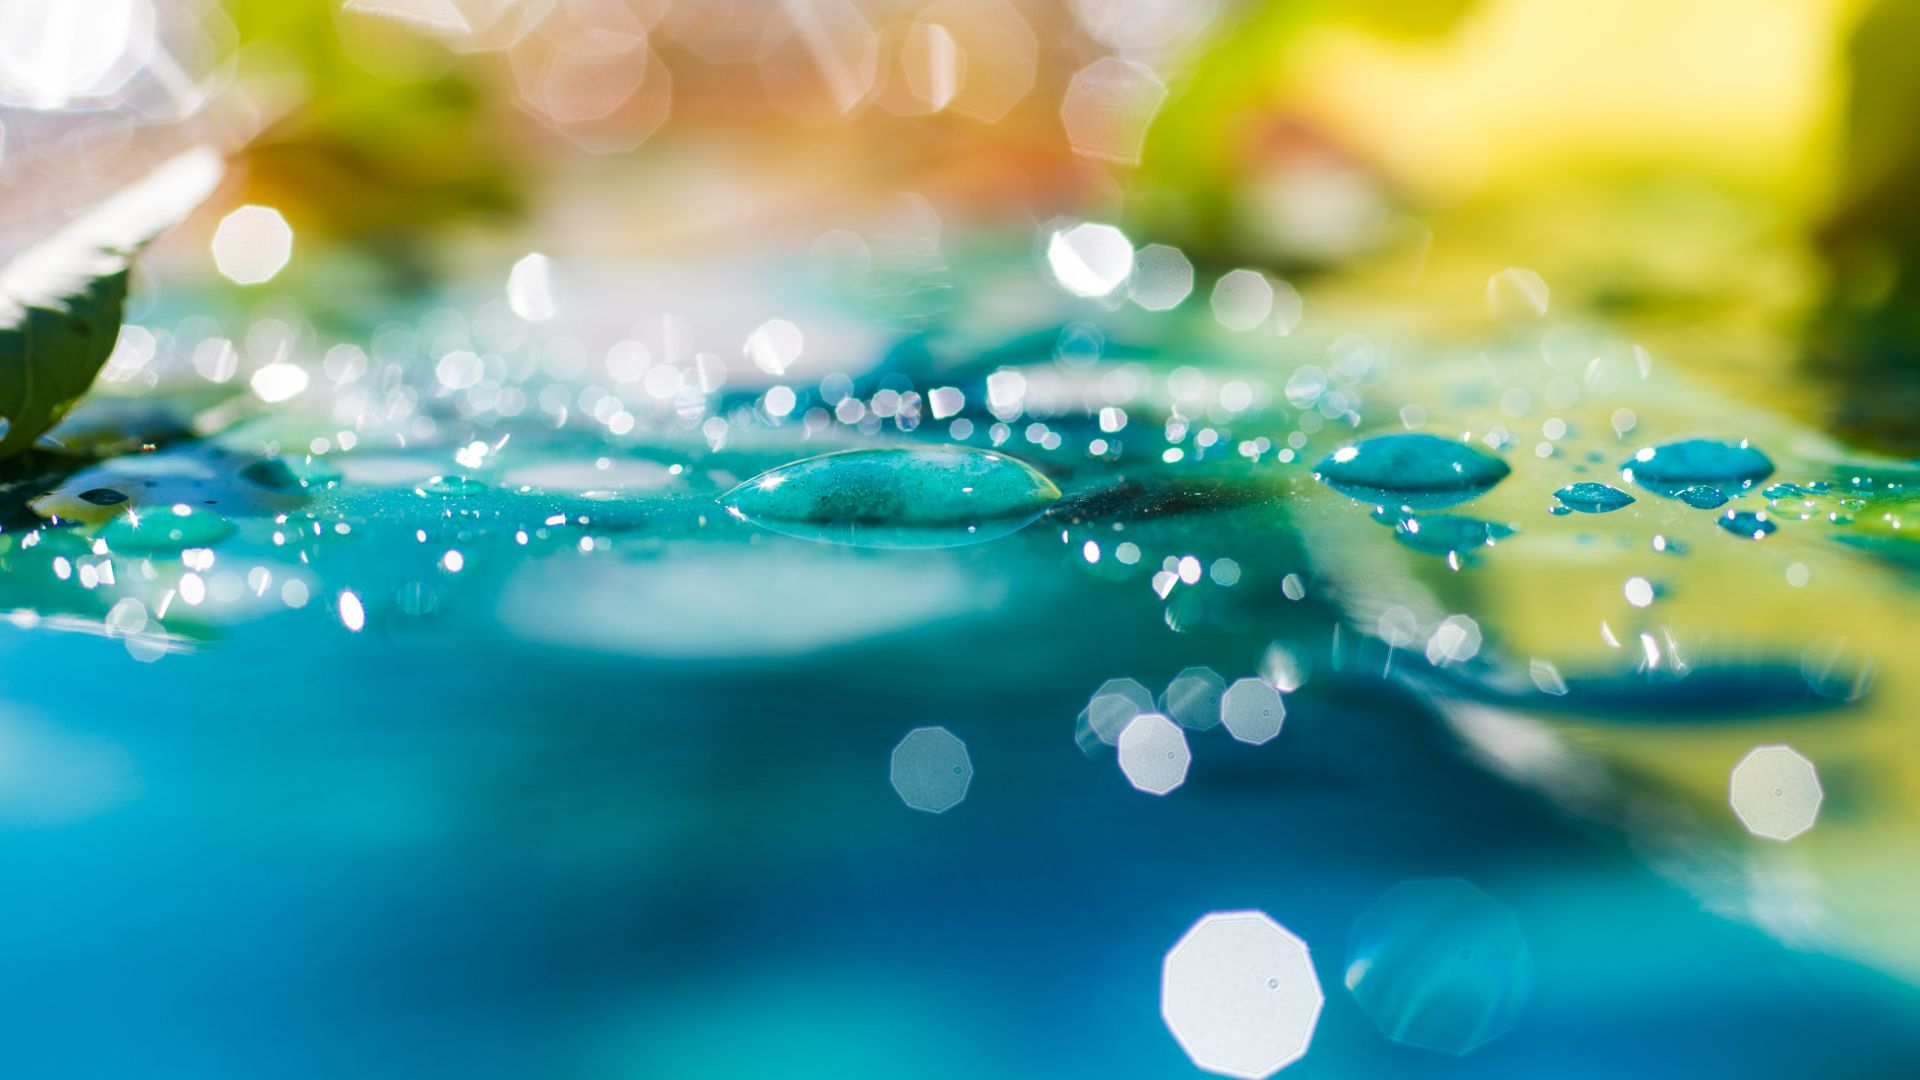 Desktop Wallpaper Surface, Water Drops, Abstract, Bokeh, Hd Image, Picture,  Background, A4bf75